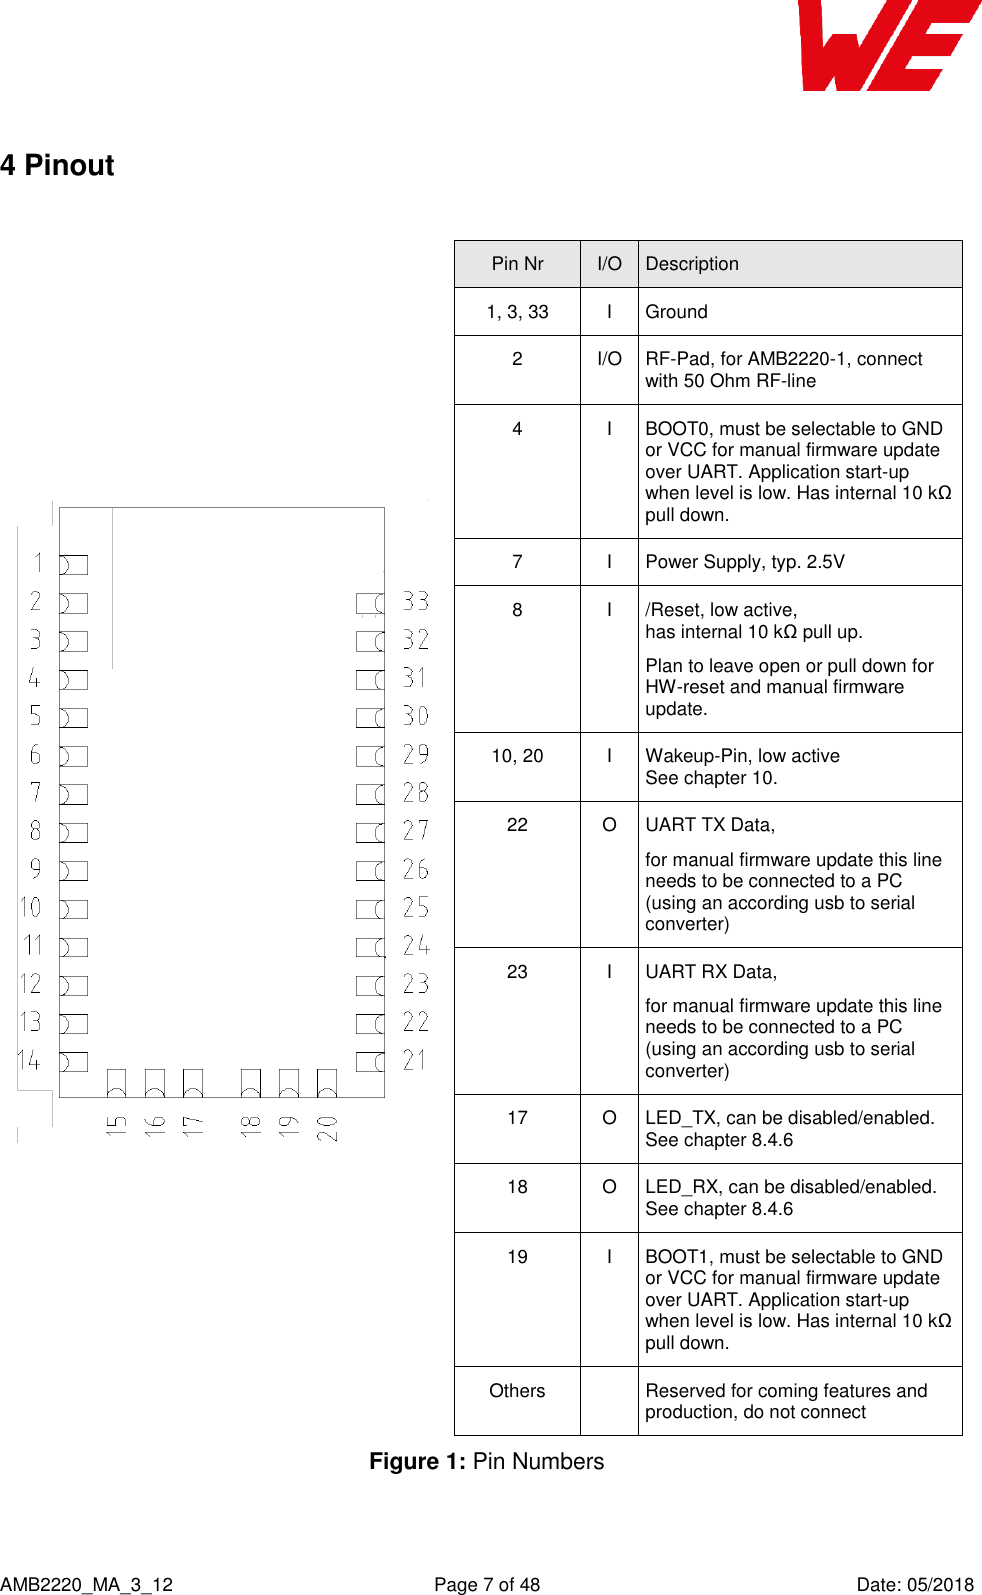    AMB2220_MA_3_12  Page 7 of 48  Date: 05/2018 4 Pinout   Pin Nr I/O Description 1, 3, 33 I Ground 2 I/O RF-Pad, for AMB2220-1, connect with 50 Ohm RF-line 4 I BOOT0, must be selectable to GND or VCC for manual firmware update over UART. Application start-up when level is low. Has internal 10 kΩ pull down. 7 I Power Supply, typ. 2.5V 8 I /Reset, low active, has internal 10 kΩ pull up. Plan to leave open or pull down for HW-reset and manual firmware update. 10, 20 I Wakeup-Pin, low active  See chapter 10. 22 O UART TX Data,  for manual firmware update this line needs to be connected to a PC (using an according usb to serial converter) 23 I UART RX Data, for manual firmware update this line needs to be connected to a PC (using an according usb to serial converter) 17 O LED_TX, can be disabled/enabled. See chapter 8.4.6 18 O LED_RX, can be disabled/enabled. See chapter 8.4.6 19 I BOOT1, must be selectable to GND or VCC for manual firmware update over UART. Application start-up when level is low. Has internal 10 kΩ pull down. Others  Reserved for coming features and production, do not connect  Figure 1: Pin Numbers    